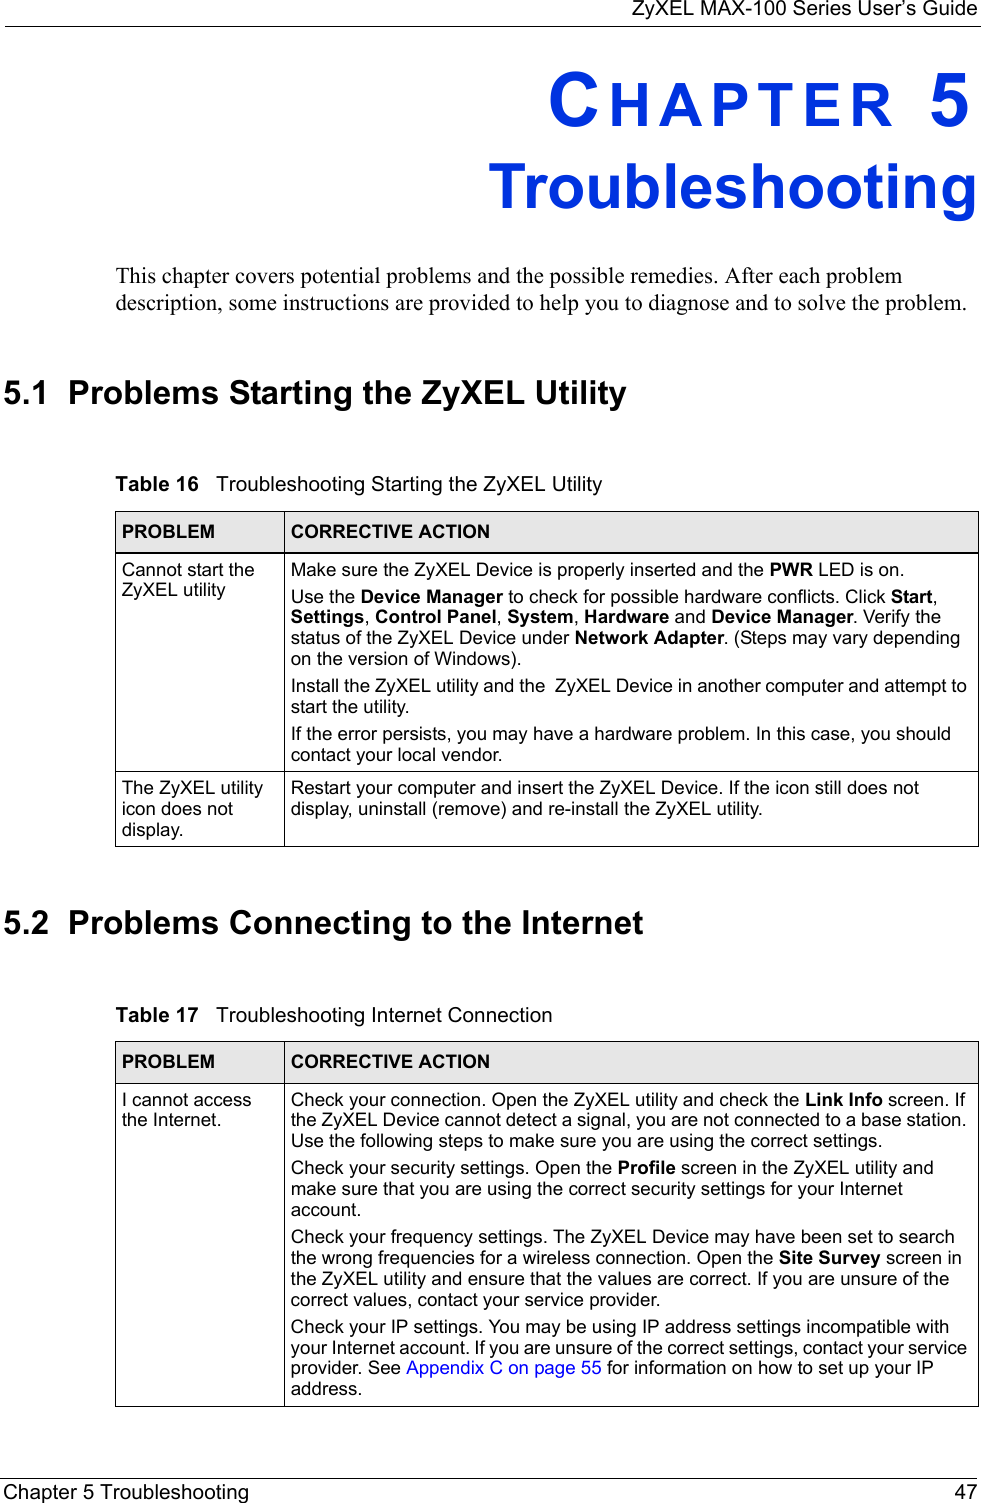 ZyXEL MAX-100 Series User’s GuideChapter 5 Troubleshooting 47CHAPTER 5TroubleshootingThis chapter covers potential problems and the possible remedies. After each problem description, some instructions are provided to help you to diagnose and to solve the problem.5.1  Problems Starting the ZyXEL Utility 5.2  Problems Connecting to the InternetTable 16   Troubleshooting Starting the ZyXEL Utility  PROBLEM CORRECTIVE ACTIONCannot start the ZyXEL utilityMake sure the ZyXEL Device is properly inserted and the PWR LED is on. Use the Device Manager to check for possible hardware conflicts. Click Start, Settings, Control Panel, System, Hardware and Device Manager. Verify the status of the ZyXEL Device under Network Adapter. (Steps may vary depending on the version of Windows). Install the ZyXEL utility and the  ZyXEL Device in another computer and attempt to start the utility.If the error persists, you may have a hardware problem. In this case, you should contact your local vendor.The ZyXEL utility icon does not display.Restart your computer and insert the ZyXEL Device. If the icon still does not display, uninstall (remove) and re-install the ZyXEL utility.Table 17   Troubleshooting Internet Connection PROBLEM CORRECTIVE ACTIONI cannot access the Internet.Check your connection. Open the ZyXEL utility and check the Link Info screen. If the ZyXEL Device cannot detect a signal, you are not connected to a base station. Use the following steps to make sure you are using the correct settings.Check your security settings. Open the Profile screen in the ZyXEL utility and make sure that you are using the correct security settings for your Internet account.Check your frequency settings. The ZyXEL Device may have been set to search the wrong frequencies for a wireless connection. Open the Site Survey screen in the ZyXEL utility and ensure that the values are correct. If you are unsure of the correct values, contact your service provider.Check your IP settings. You may be using IP address settings incompatible with your Internet account. If you are unsure of the correct settings, contact your service provider. See Appendix C on page 55 for information on how to set up your IP address.